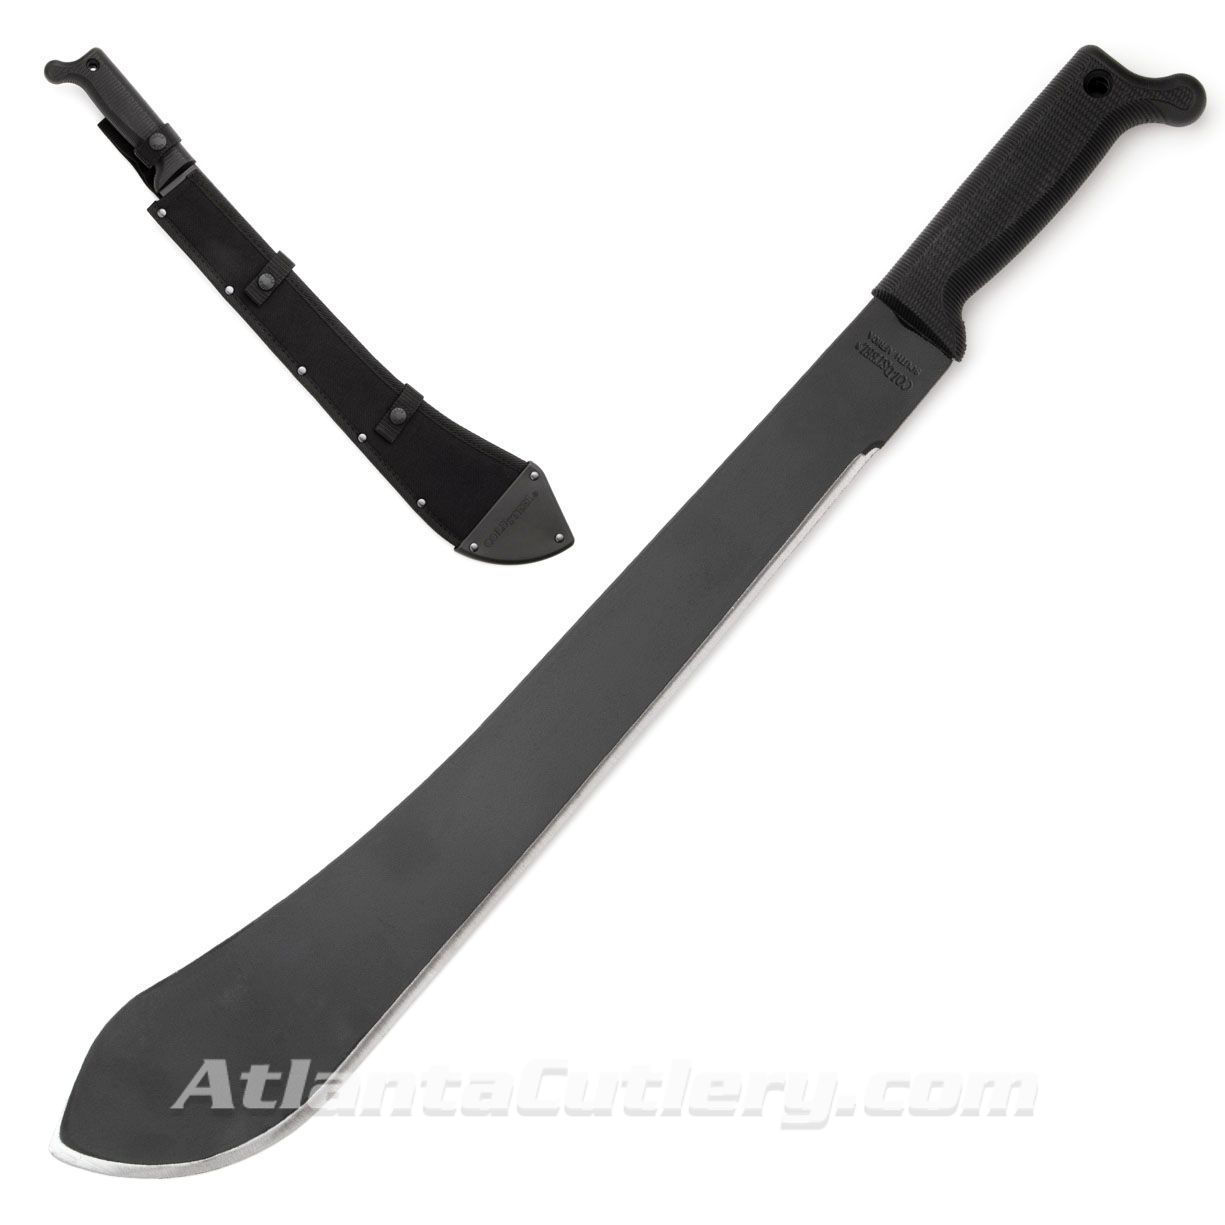 Cold Steel Bolo Machete has sharp high carbon steel blade, polypropylene handle for secure grip, includes sheath 